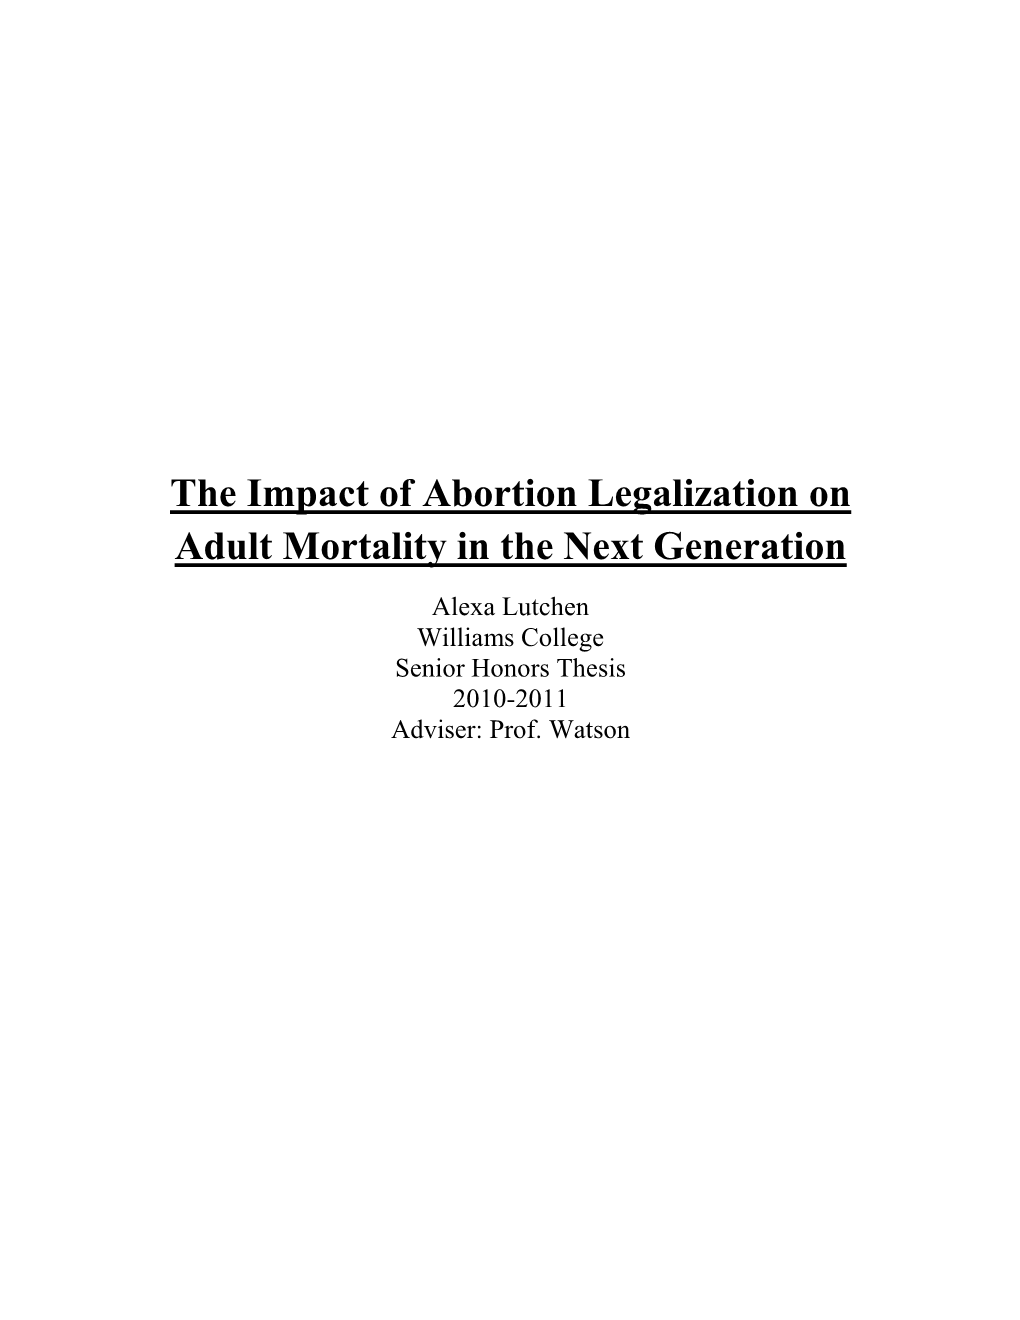 The Impact of Abortion Legalization on Adult Mortality in the Next Generation